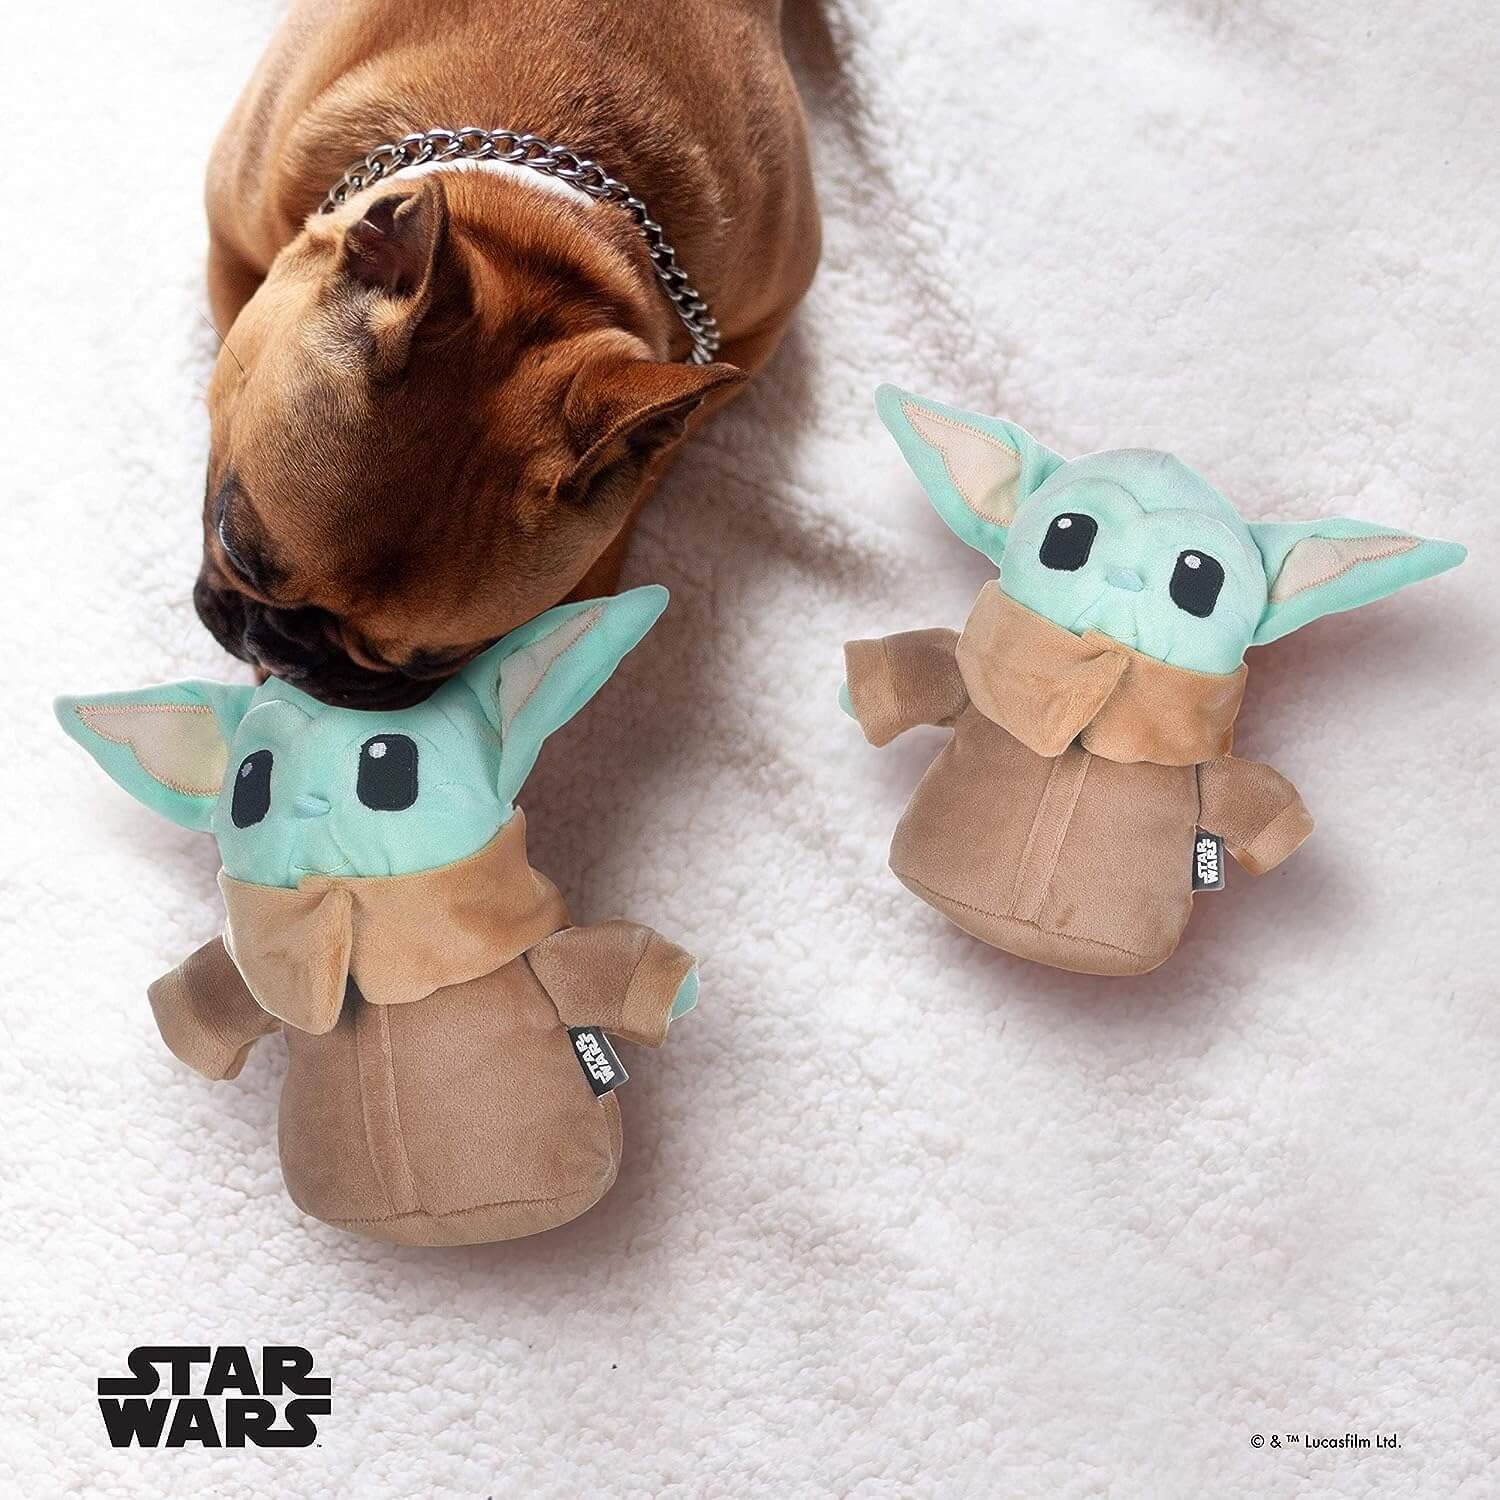 Star Wars The Mandalorian The Child Plush Figure Dog Toys Bulk 12 Pc Clipstrip | 6 Inch Small Dog Toys from Star Wars the Mandalorian | Soft, Plush, Squeaky Dog Toys Great for Small Pet Shops